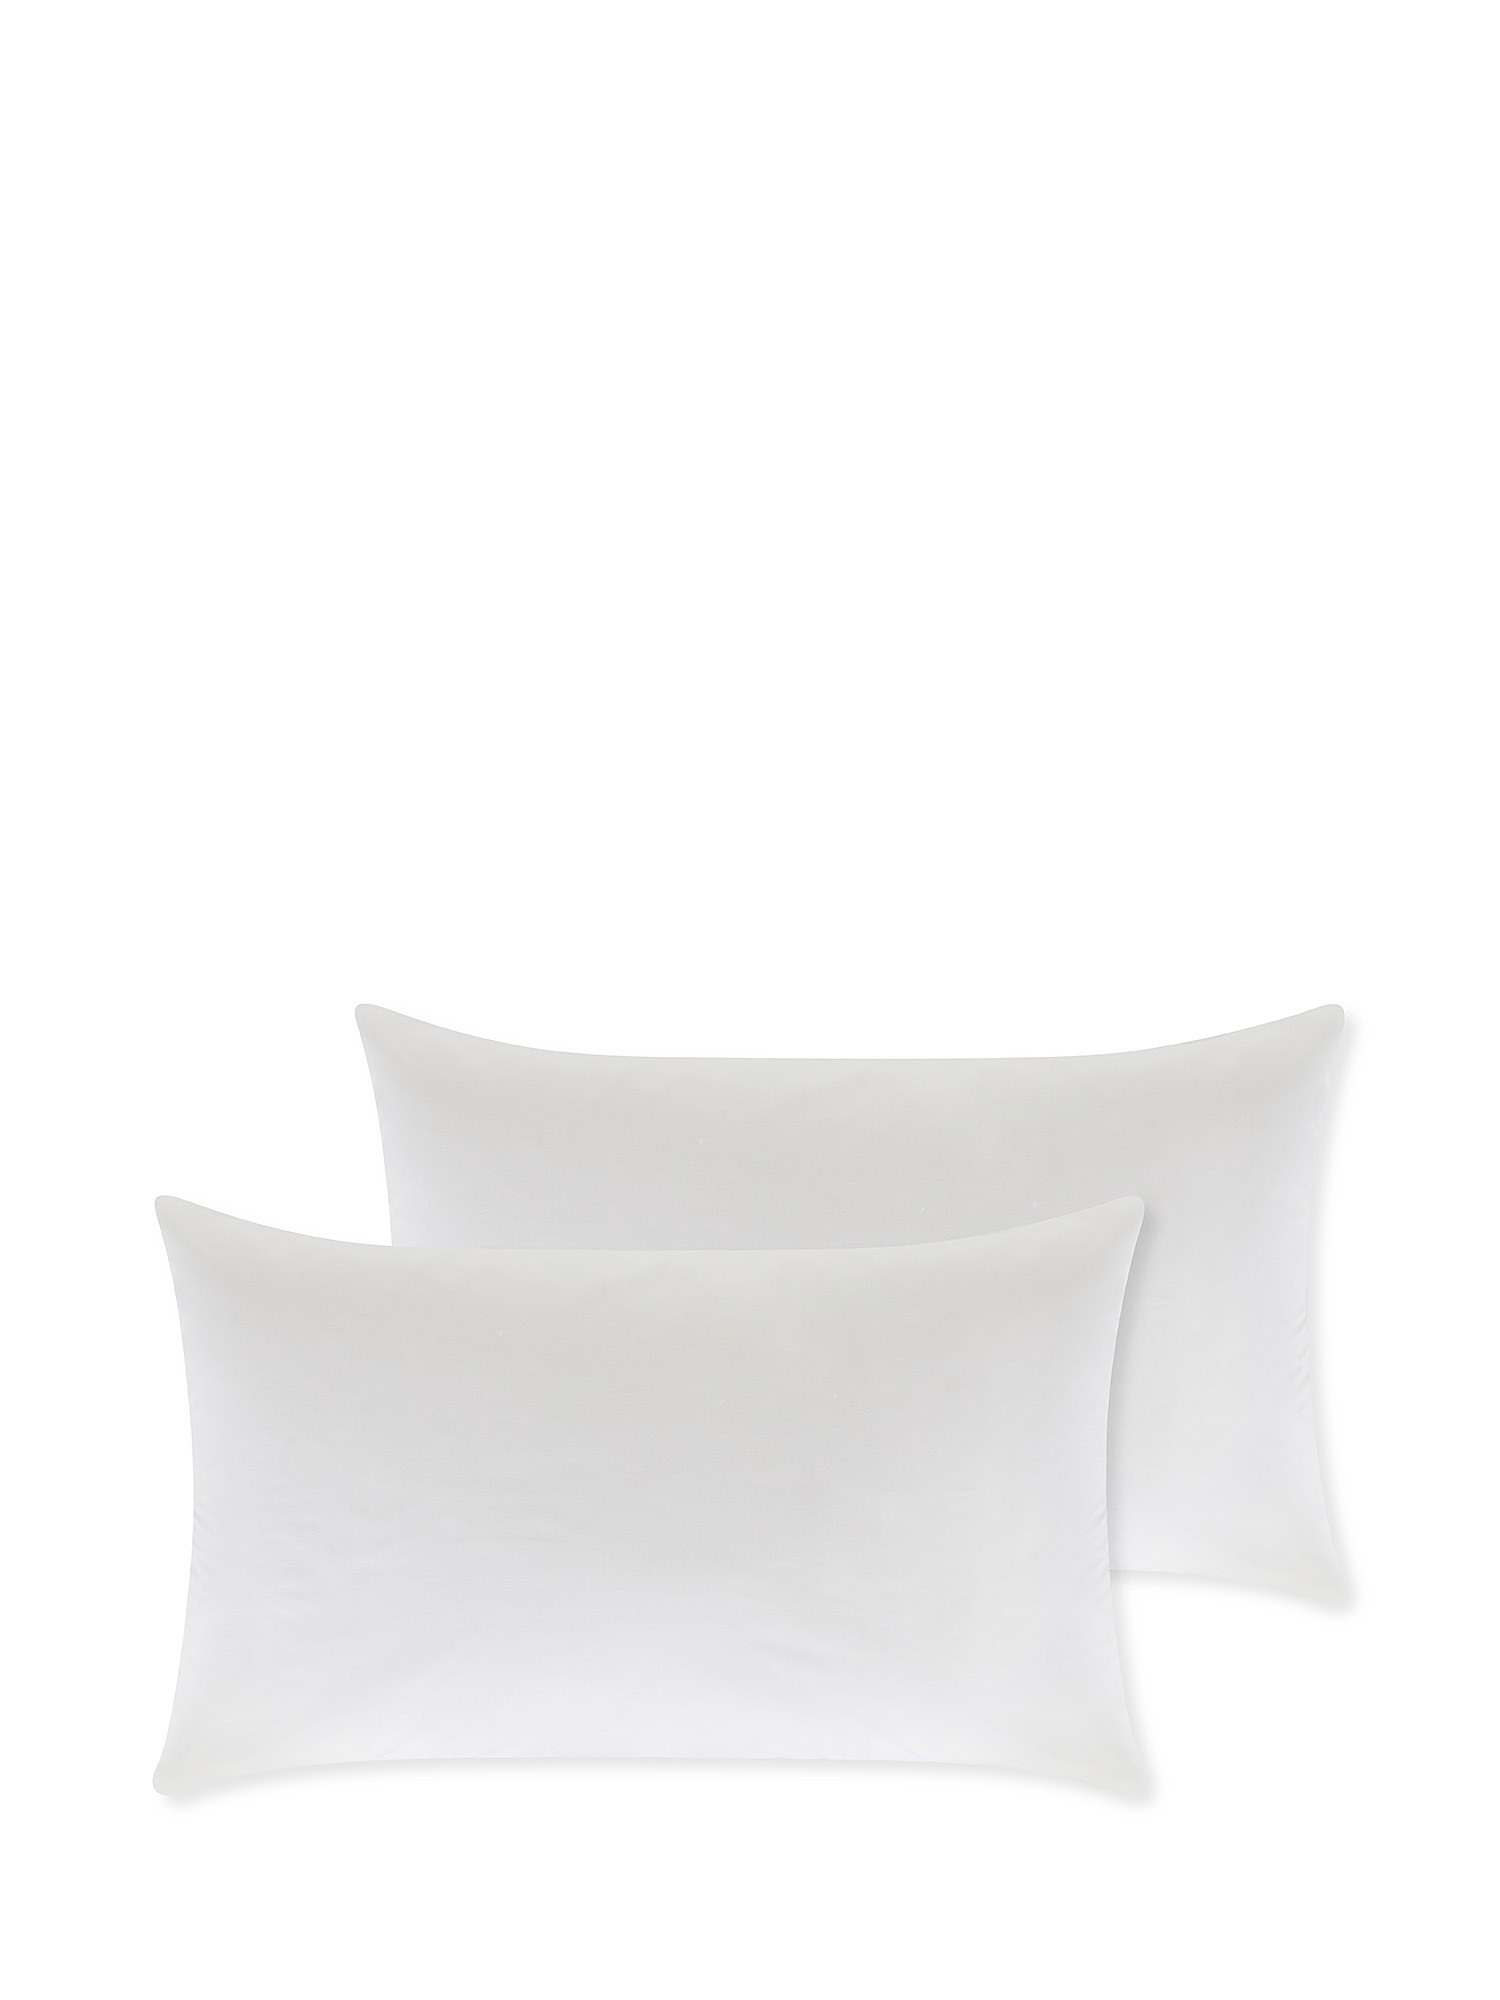 Set of 2 solid color cotton percale pillowcases, White, large image number 0